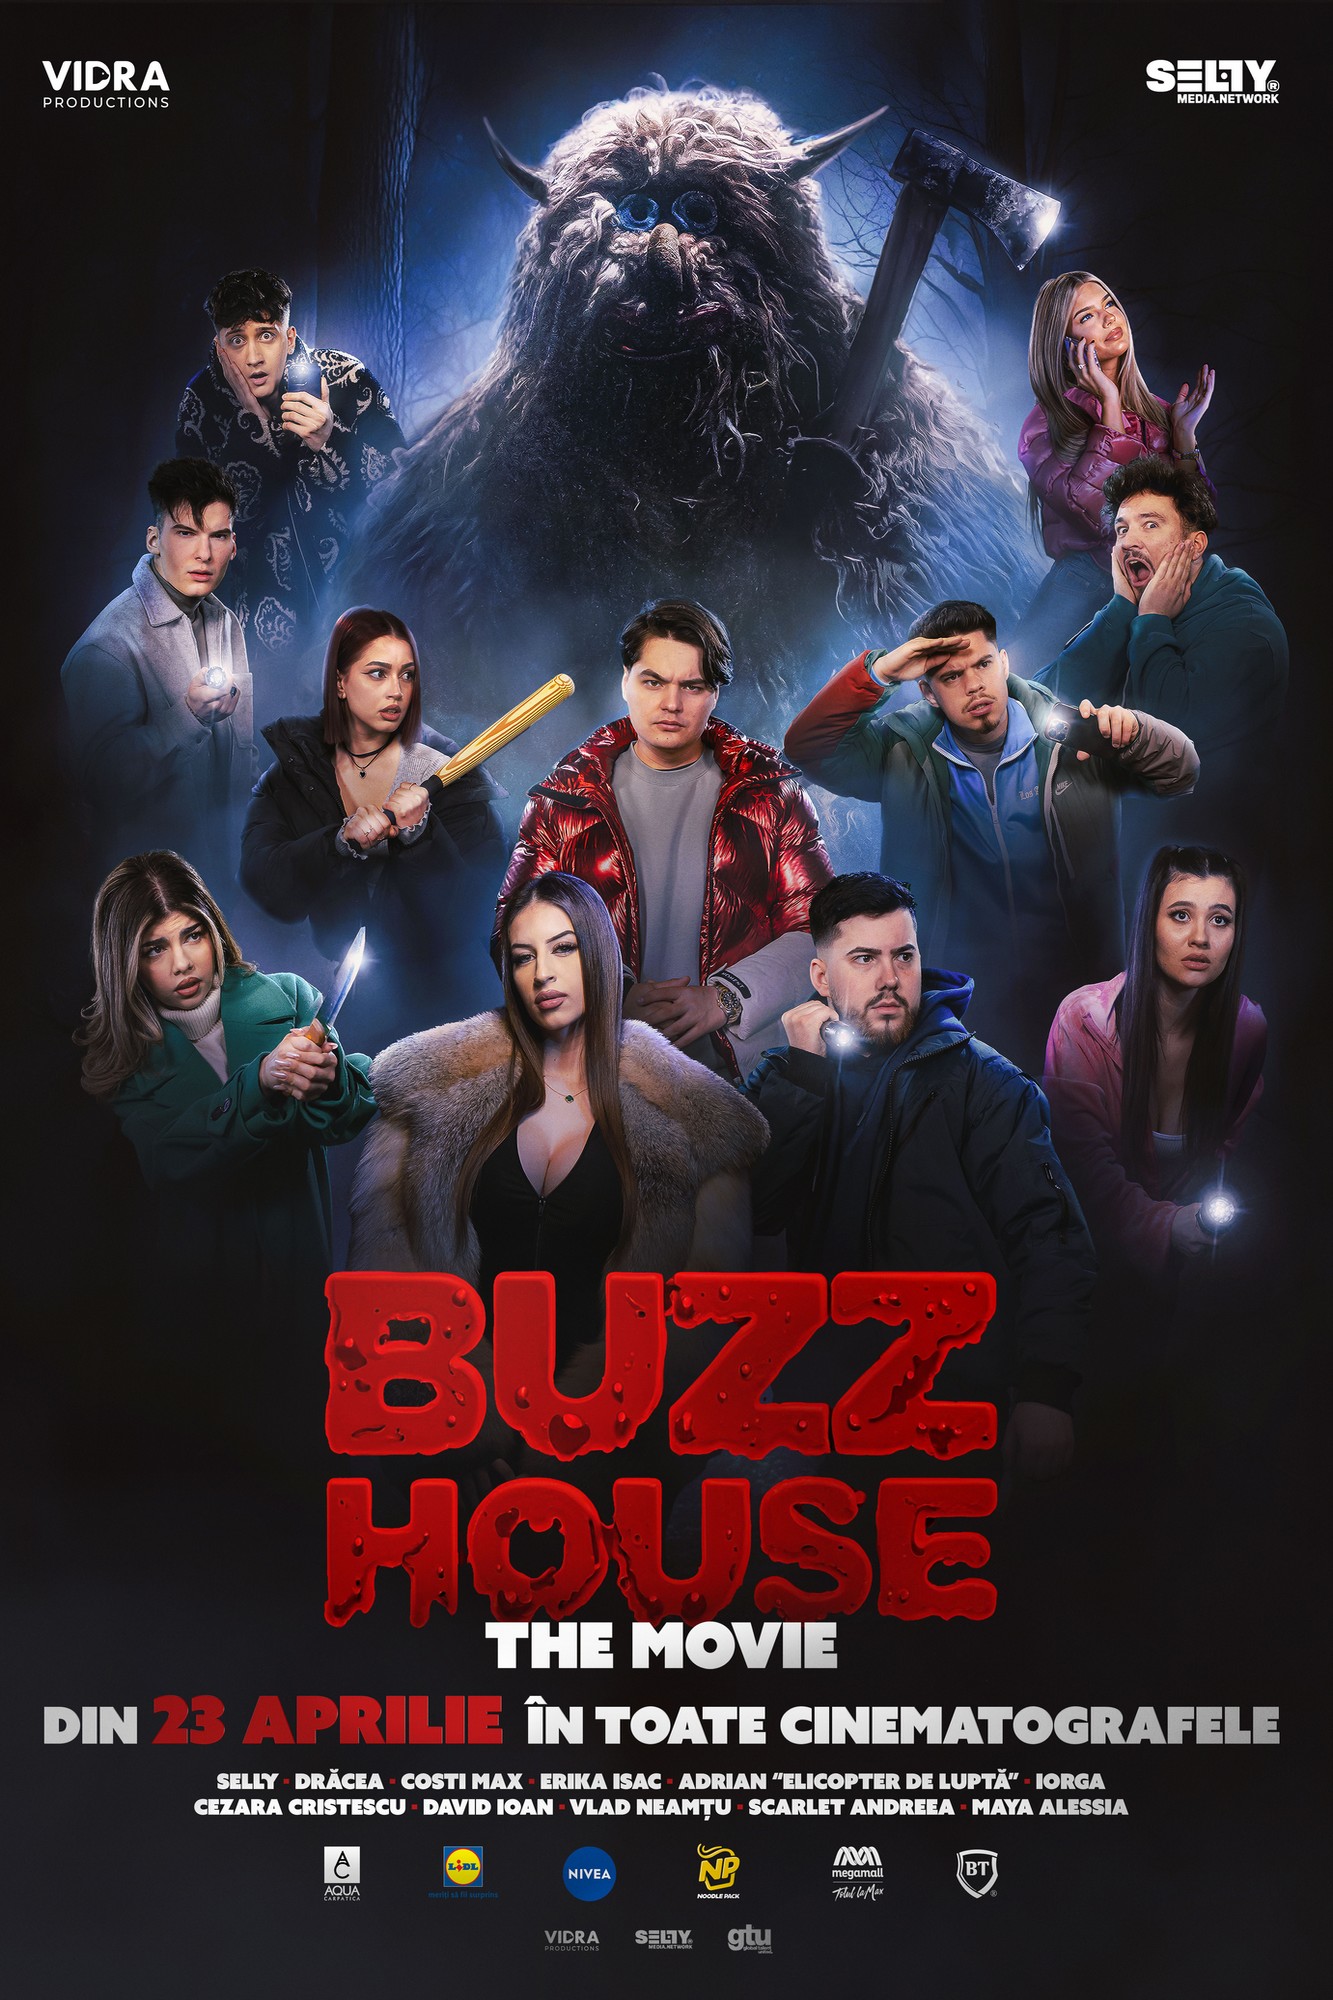 Buzz House The Movie POSTER